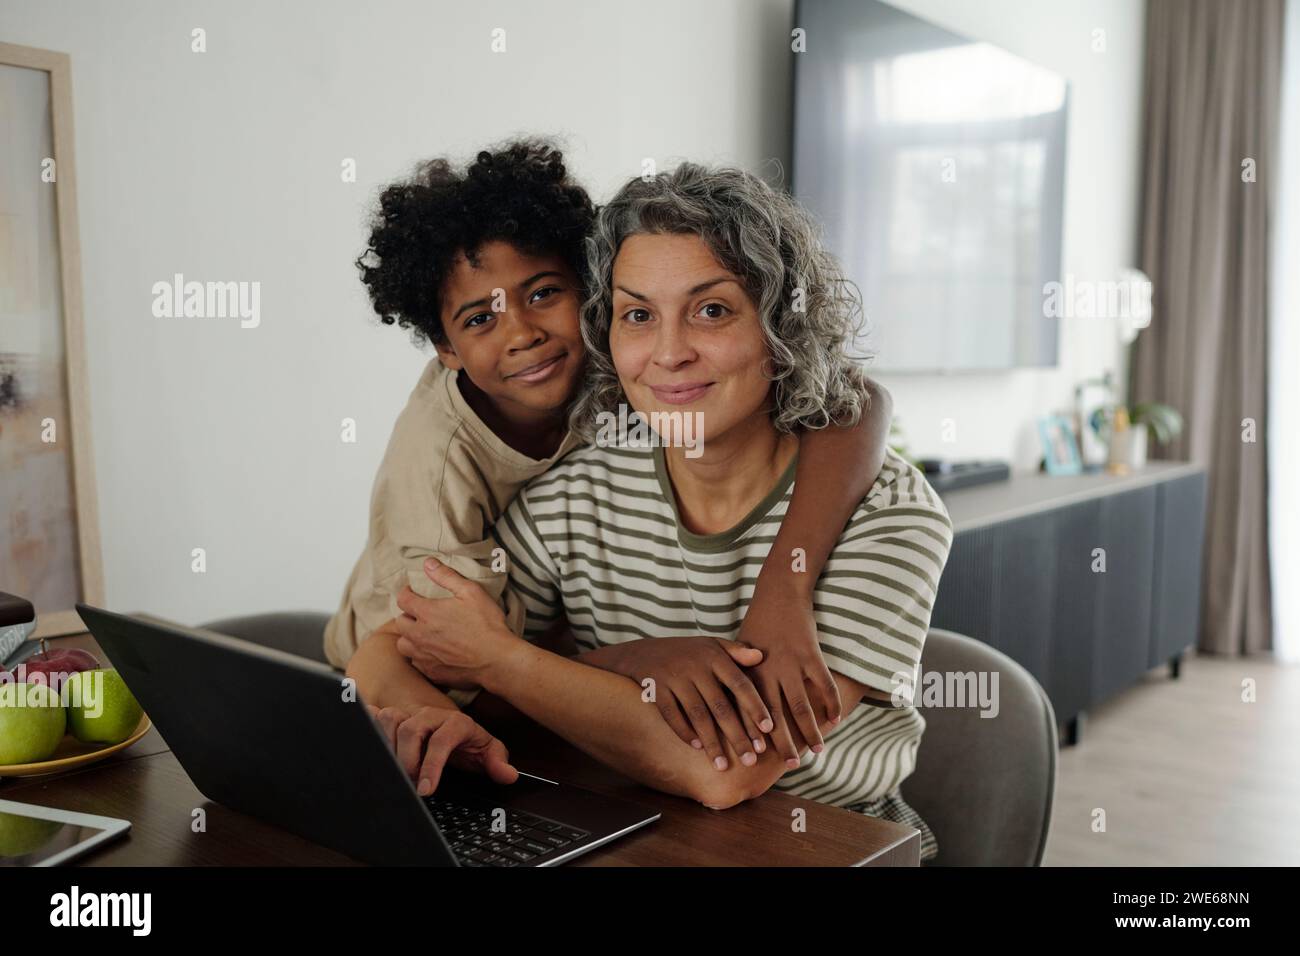 Smiling mother and son hugging each other at home Stock Photo